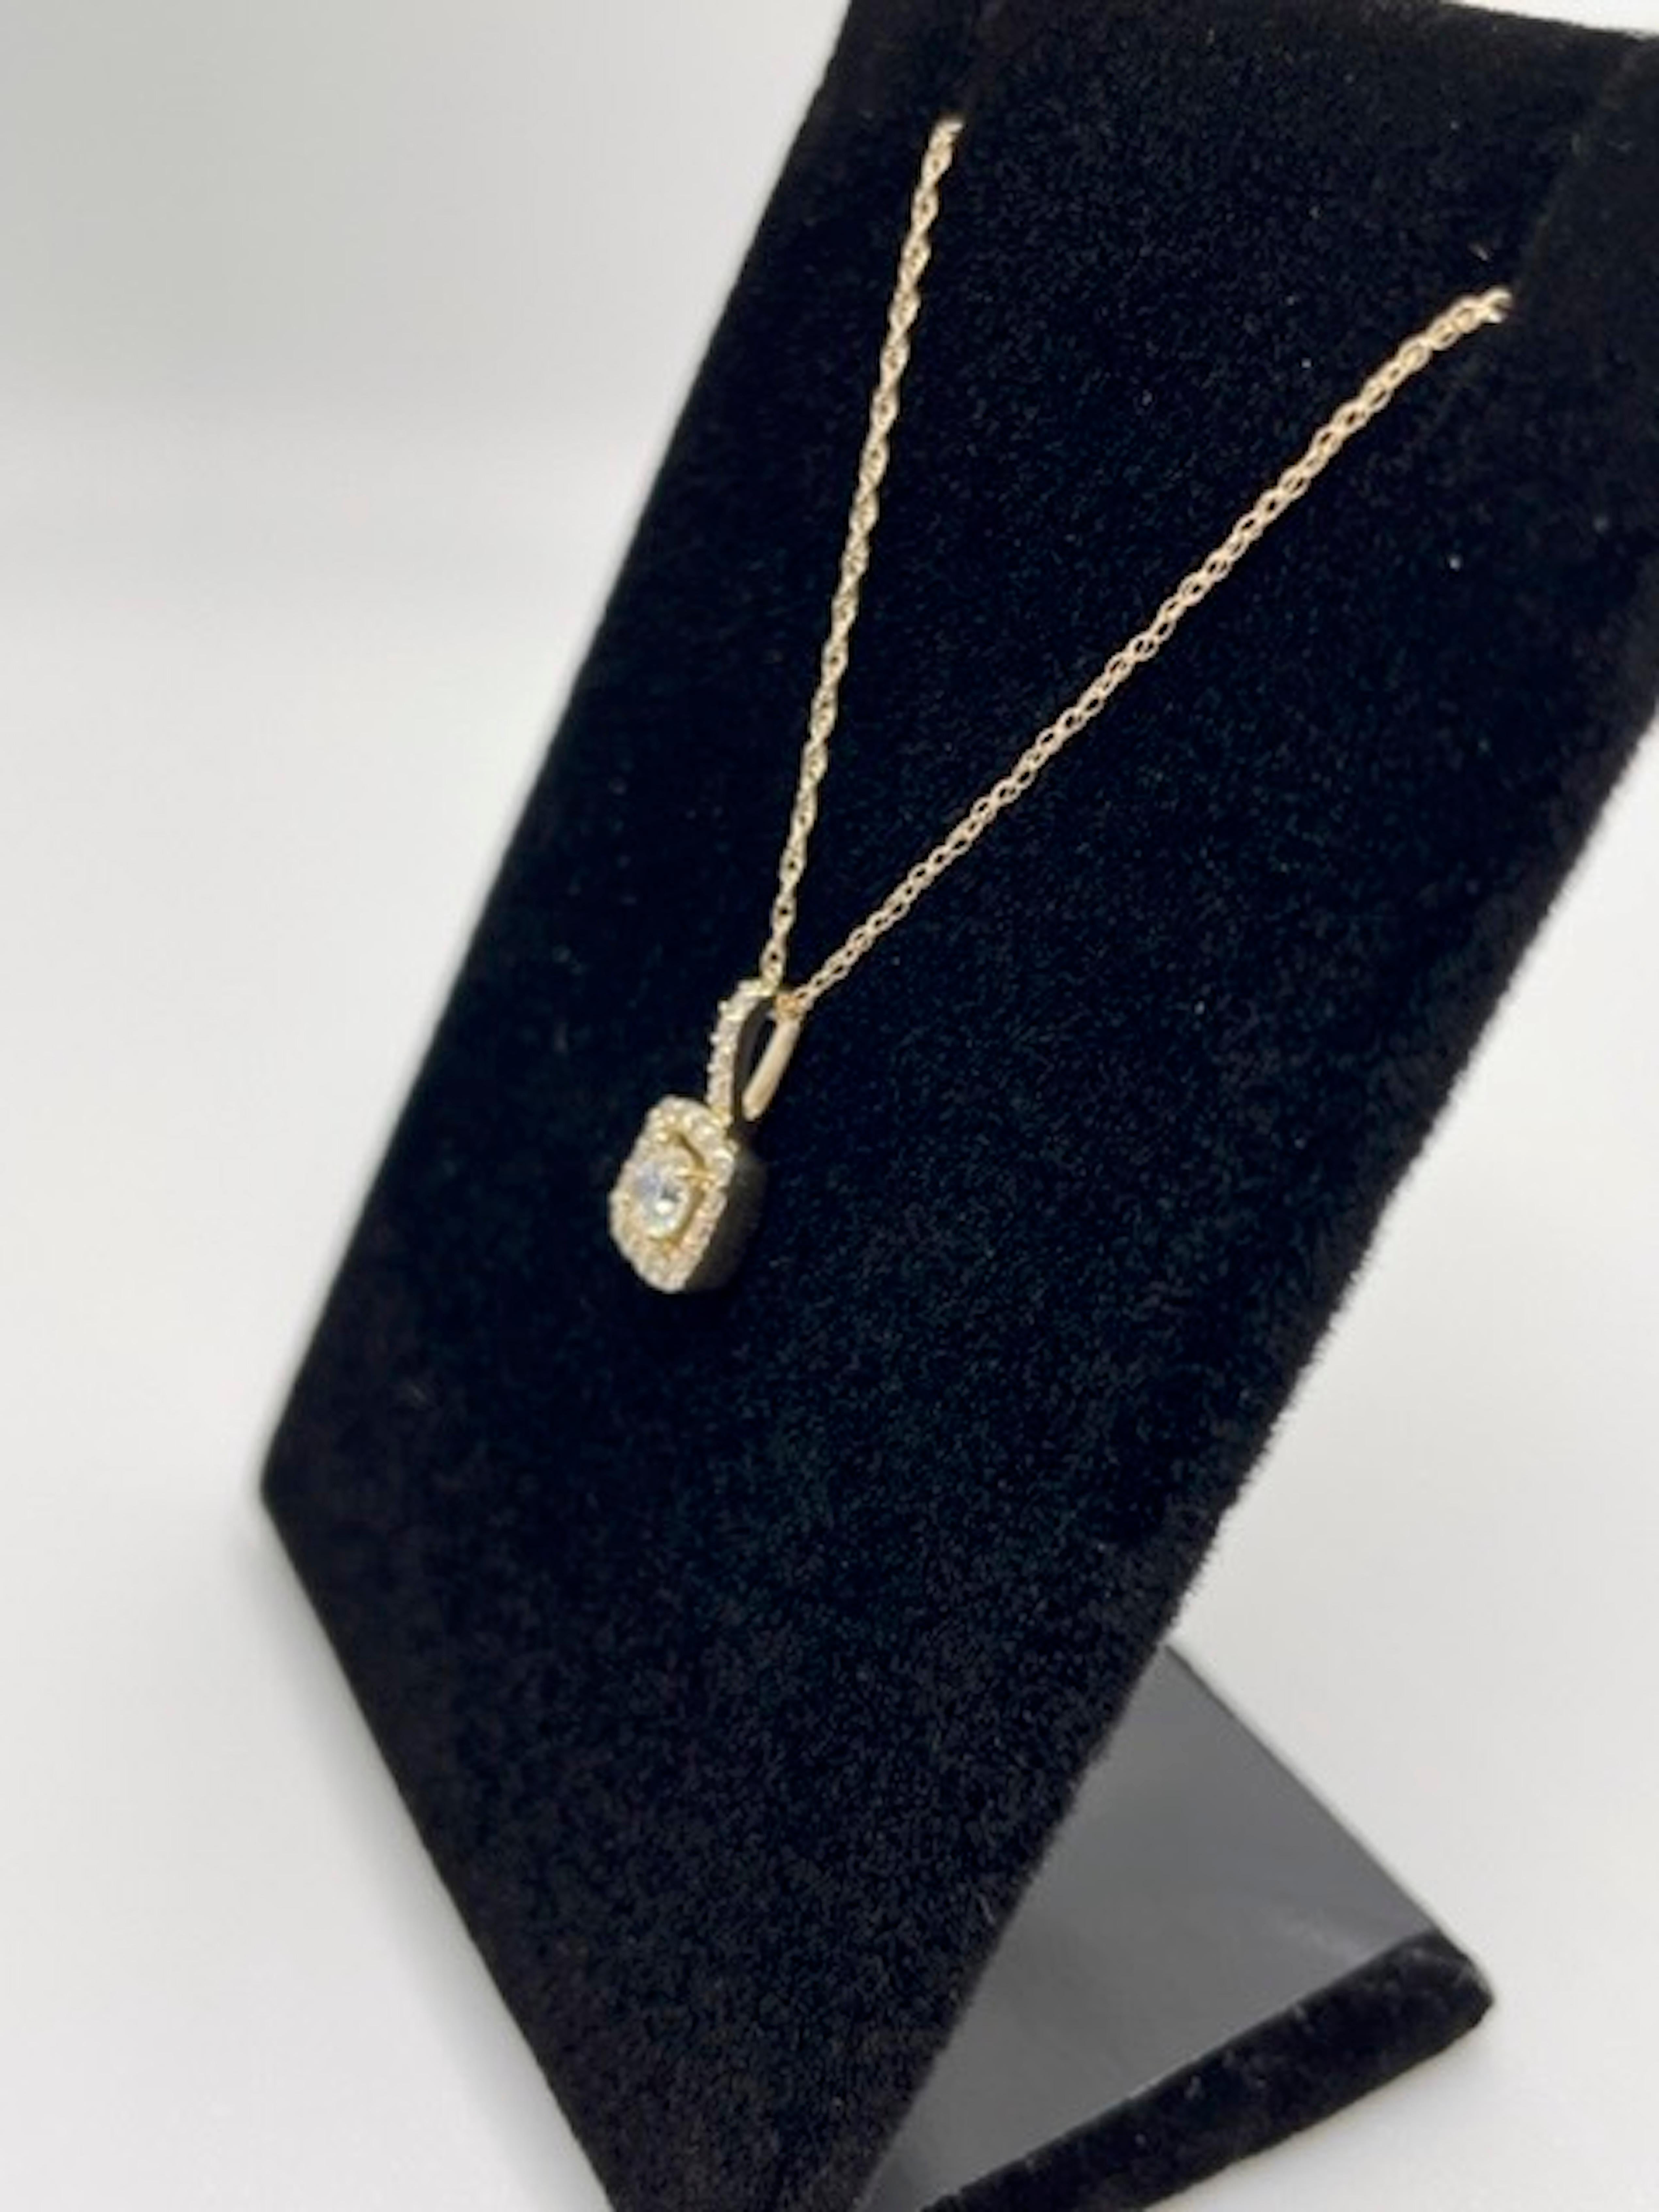 This is a 14K Yellow Gold Diamond Necklace with an 18 inch gold chain.
Total Diamond Weight 0.35CT
Color: HI and Clarity: SI2-I1
Comes with a beautiful jewelry box.
